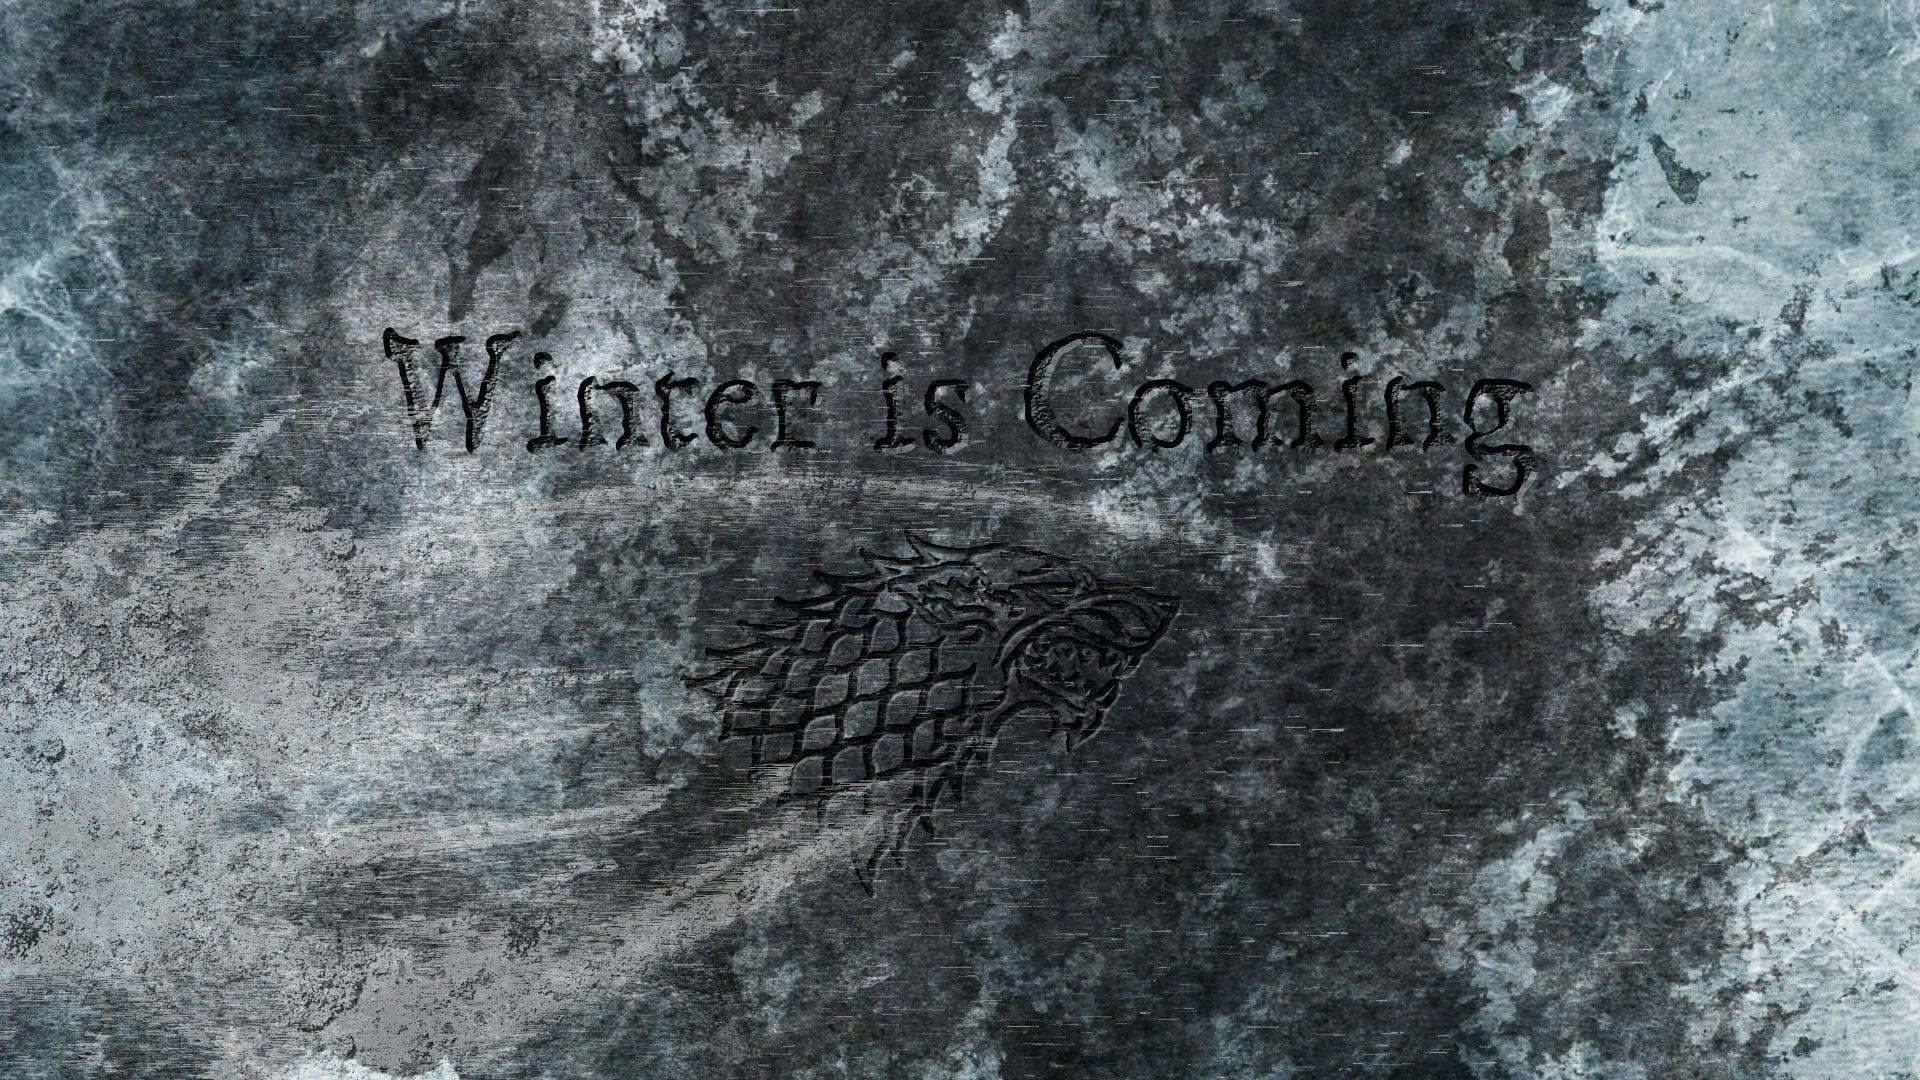 Winter is Coming text, Game of Thrones, House Stark